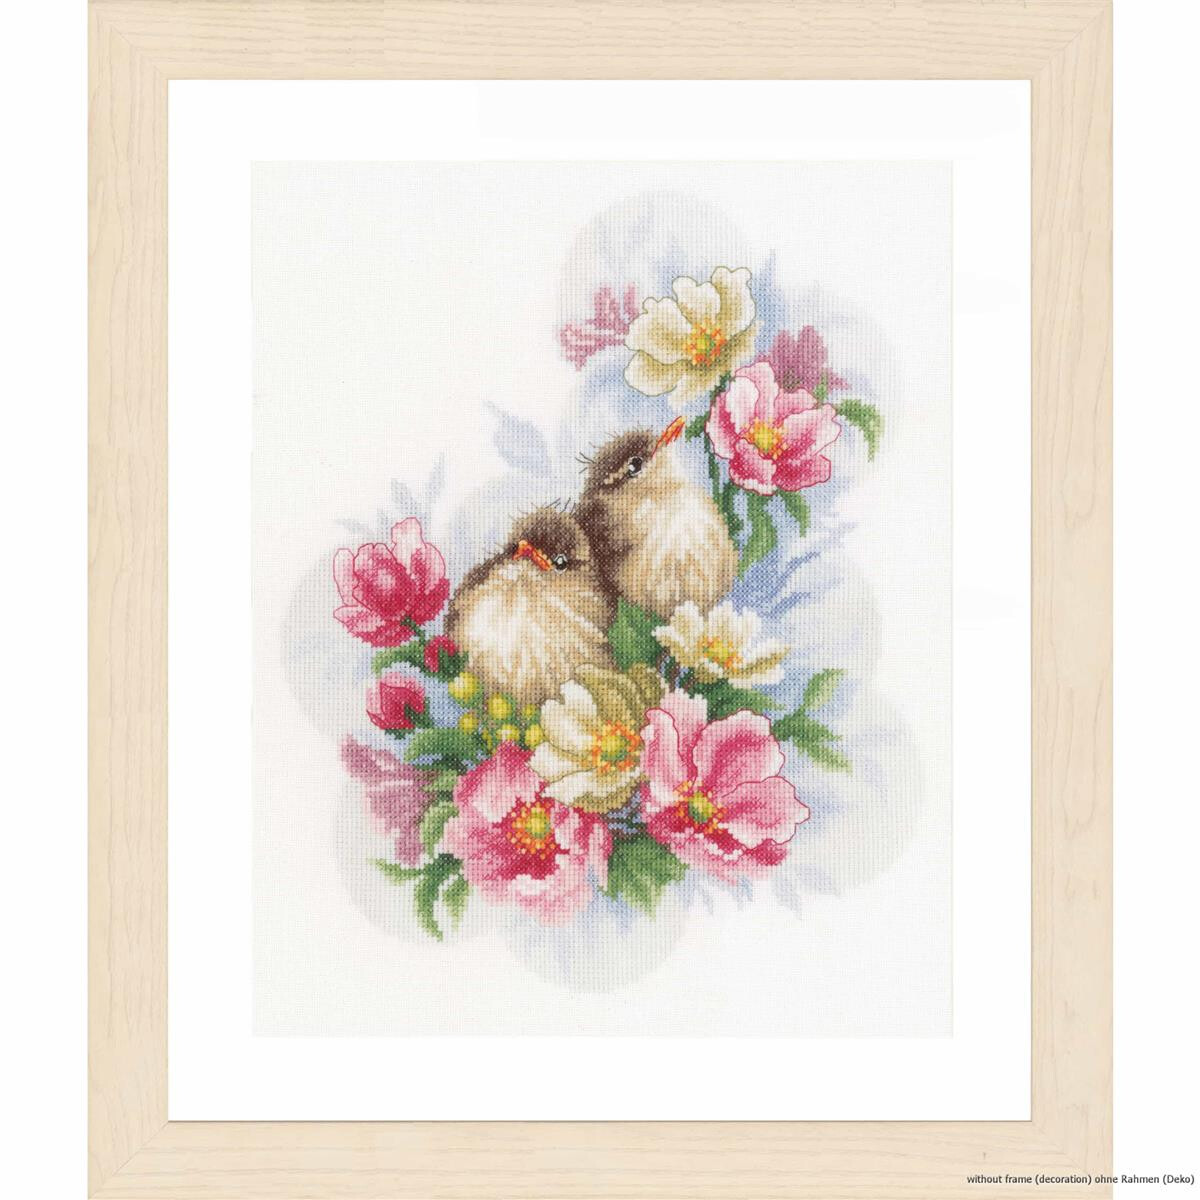 A framed artwork depicts two small birds sitting amidst a...